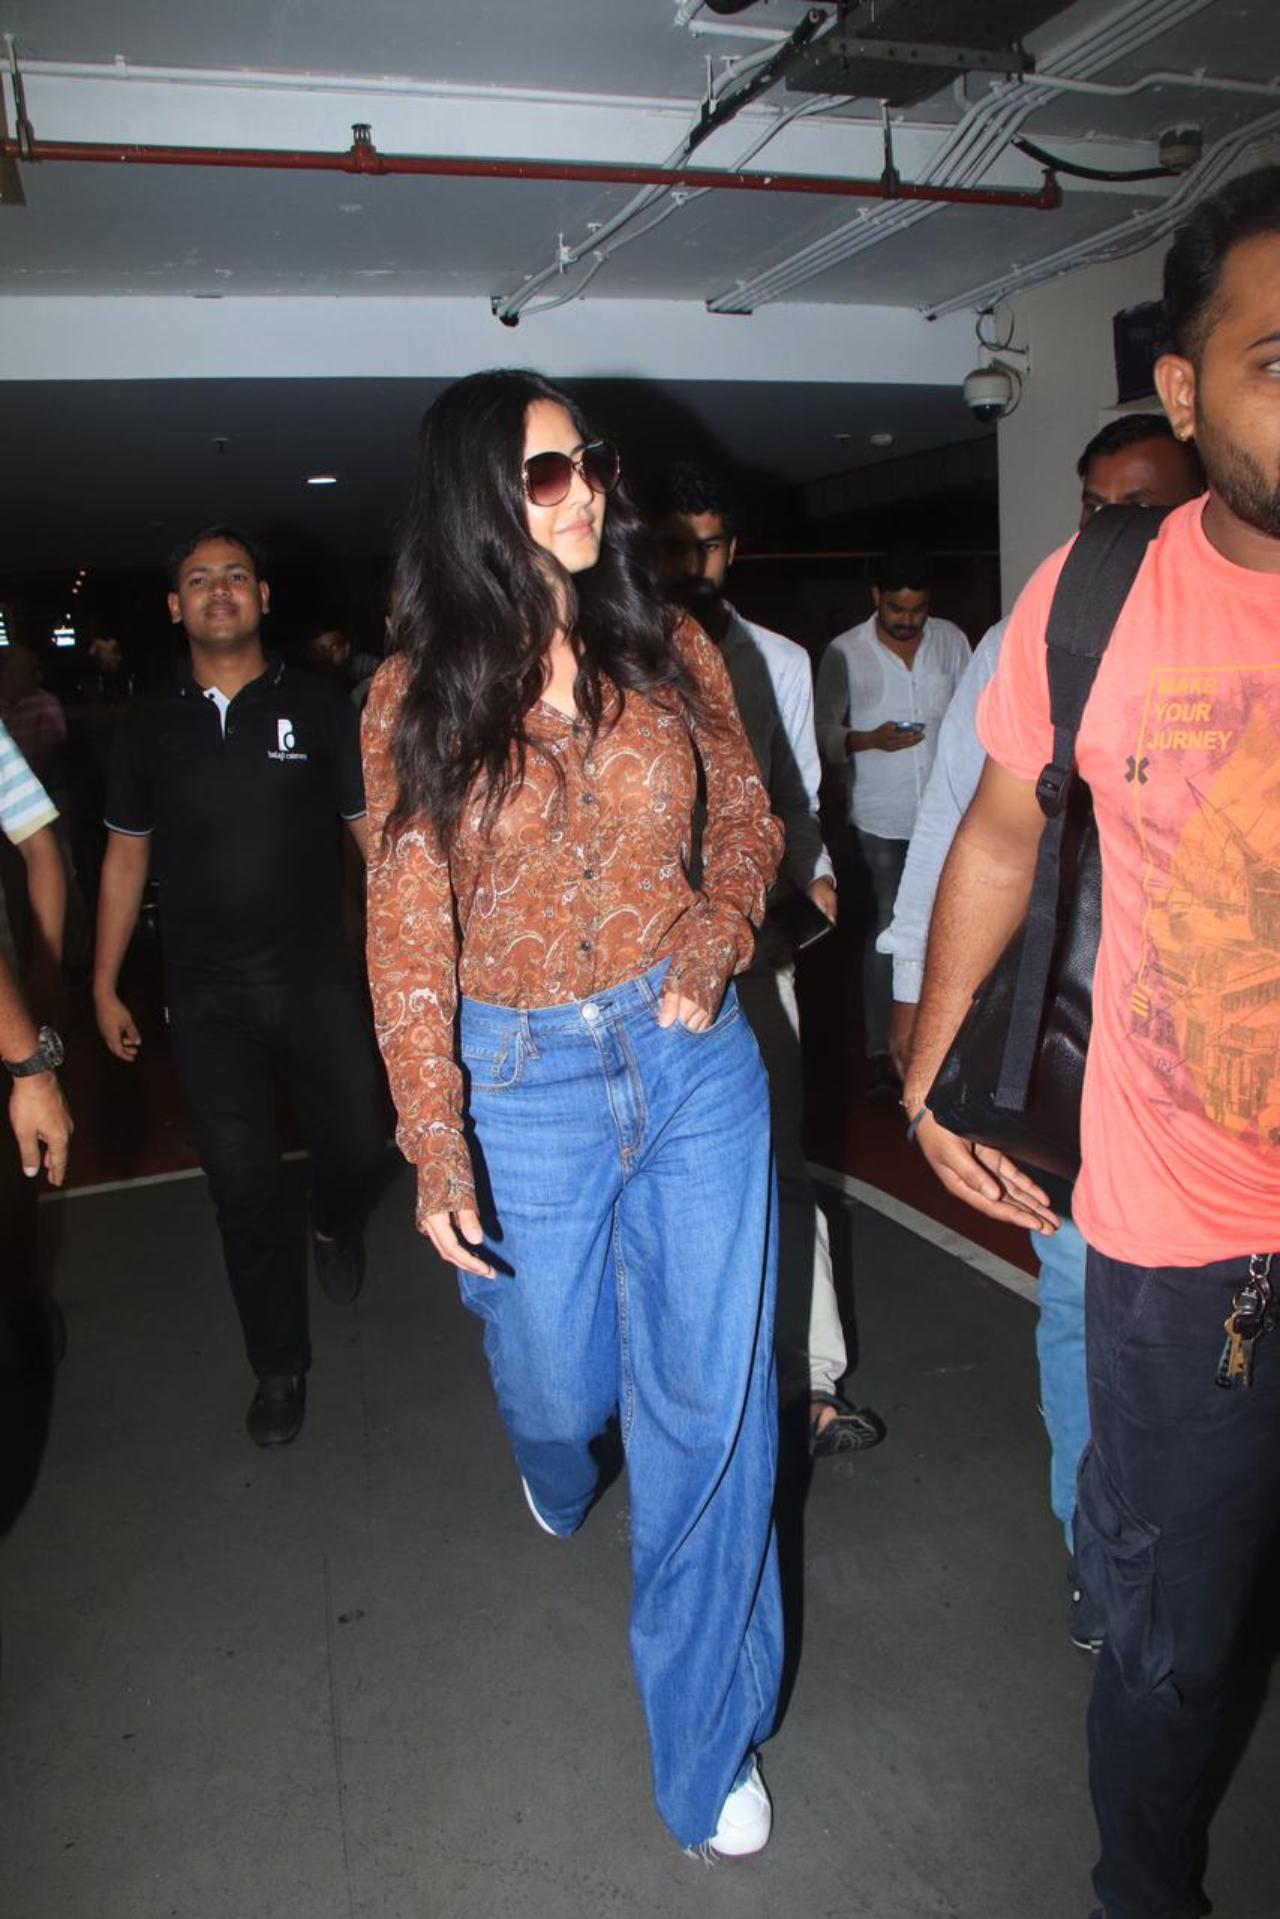 Katrina Kaif is back from her USA trip. On Friday morning, the actress was spotted at the Mumbai airport